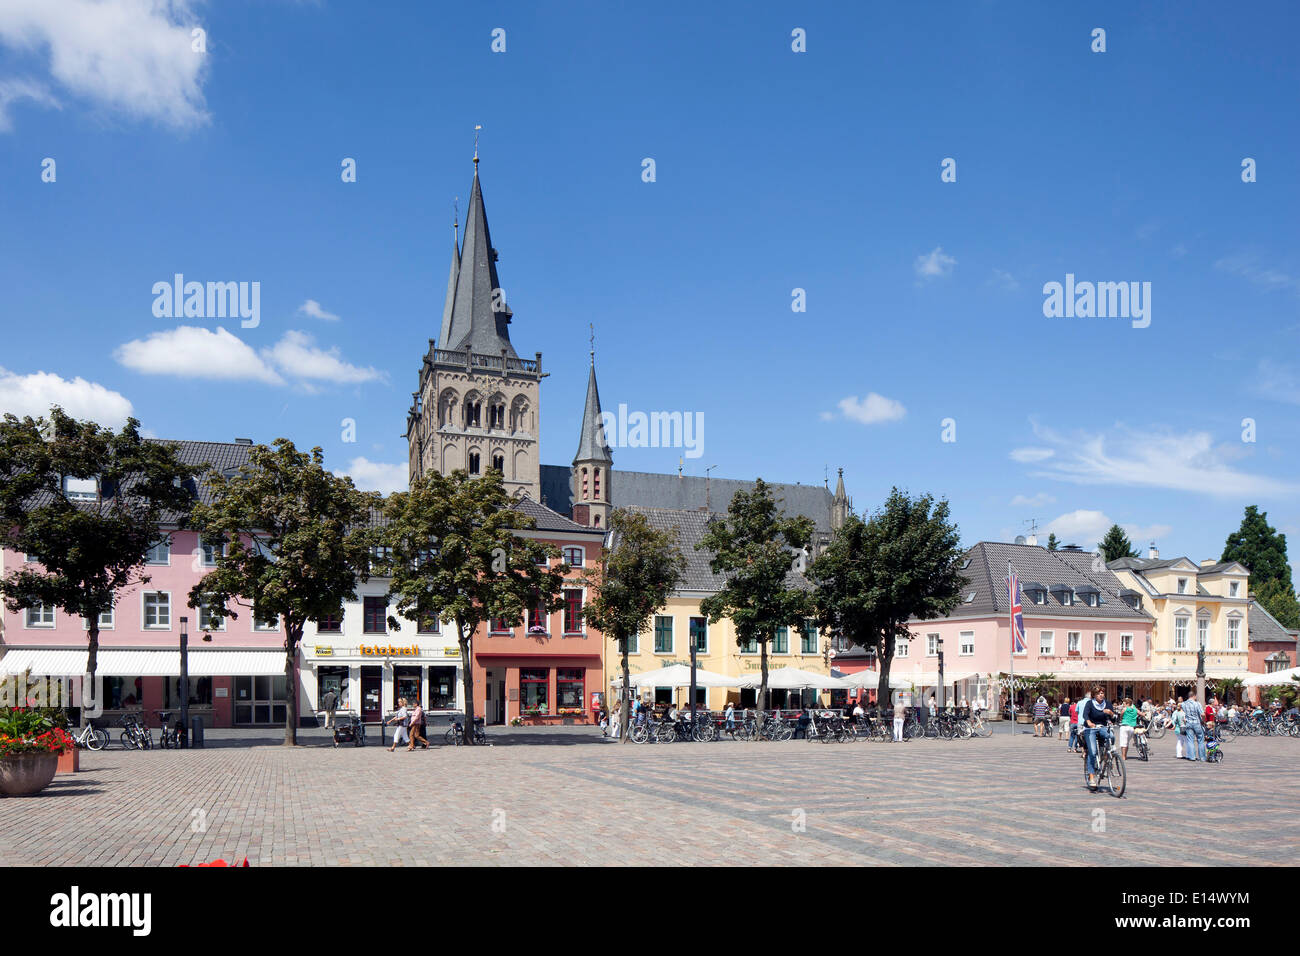 Xanten Cathedral or St. Victor's Cathedral and Marktplatz square, Xanten, Lower Rhine, North Rhine-Westphalia, Germany Stock Photo